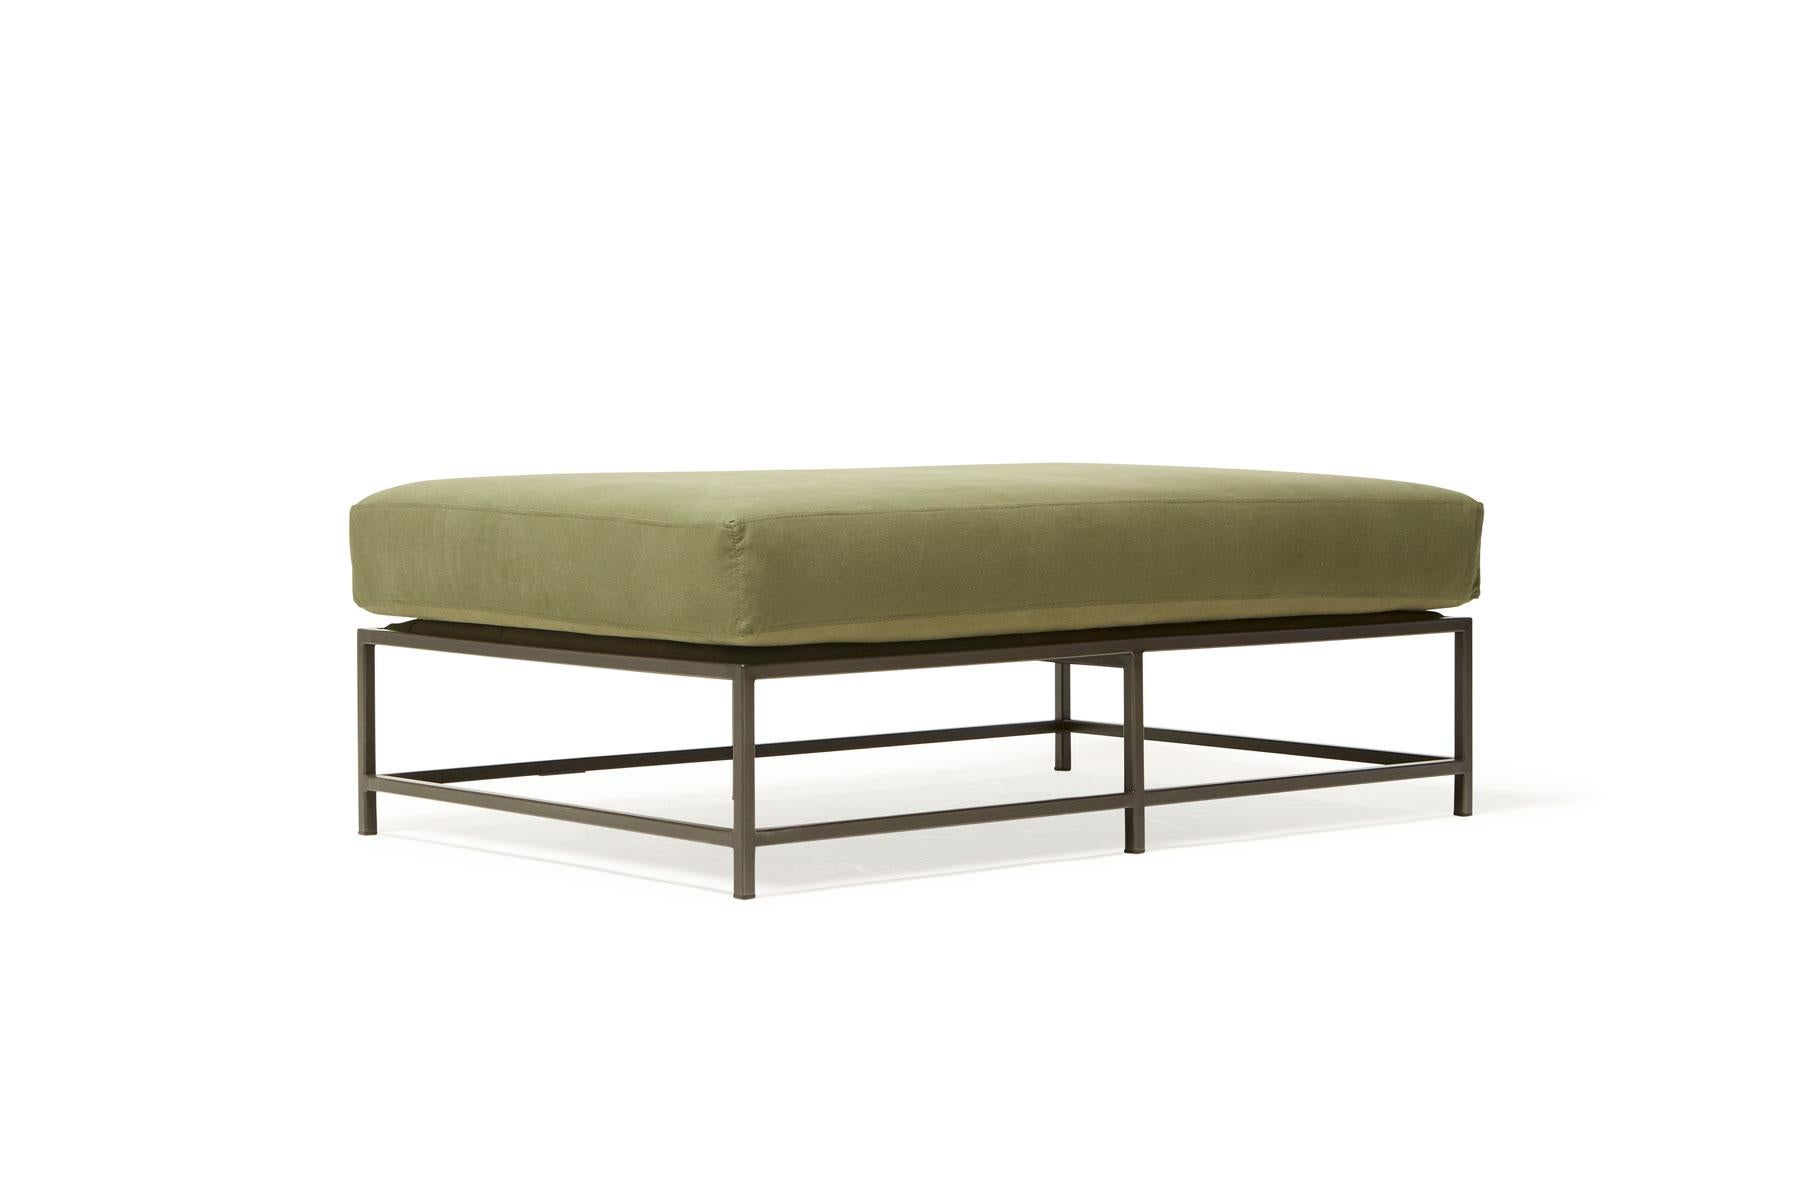 The Inheritance bench is a versatile piece that can be used as a chaise extension on any sofa, as an independent seating option or as a large upholstered coffee table. 

This variation is upholstered in olive canvas. Sitting atop a blackened steel